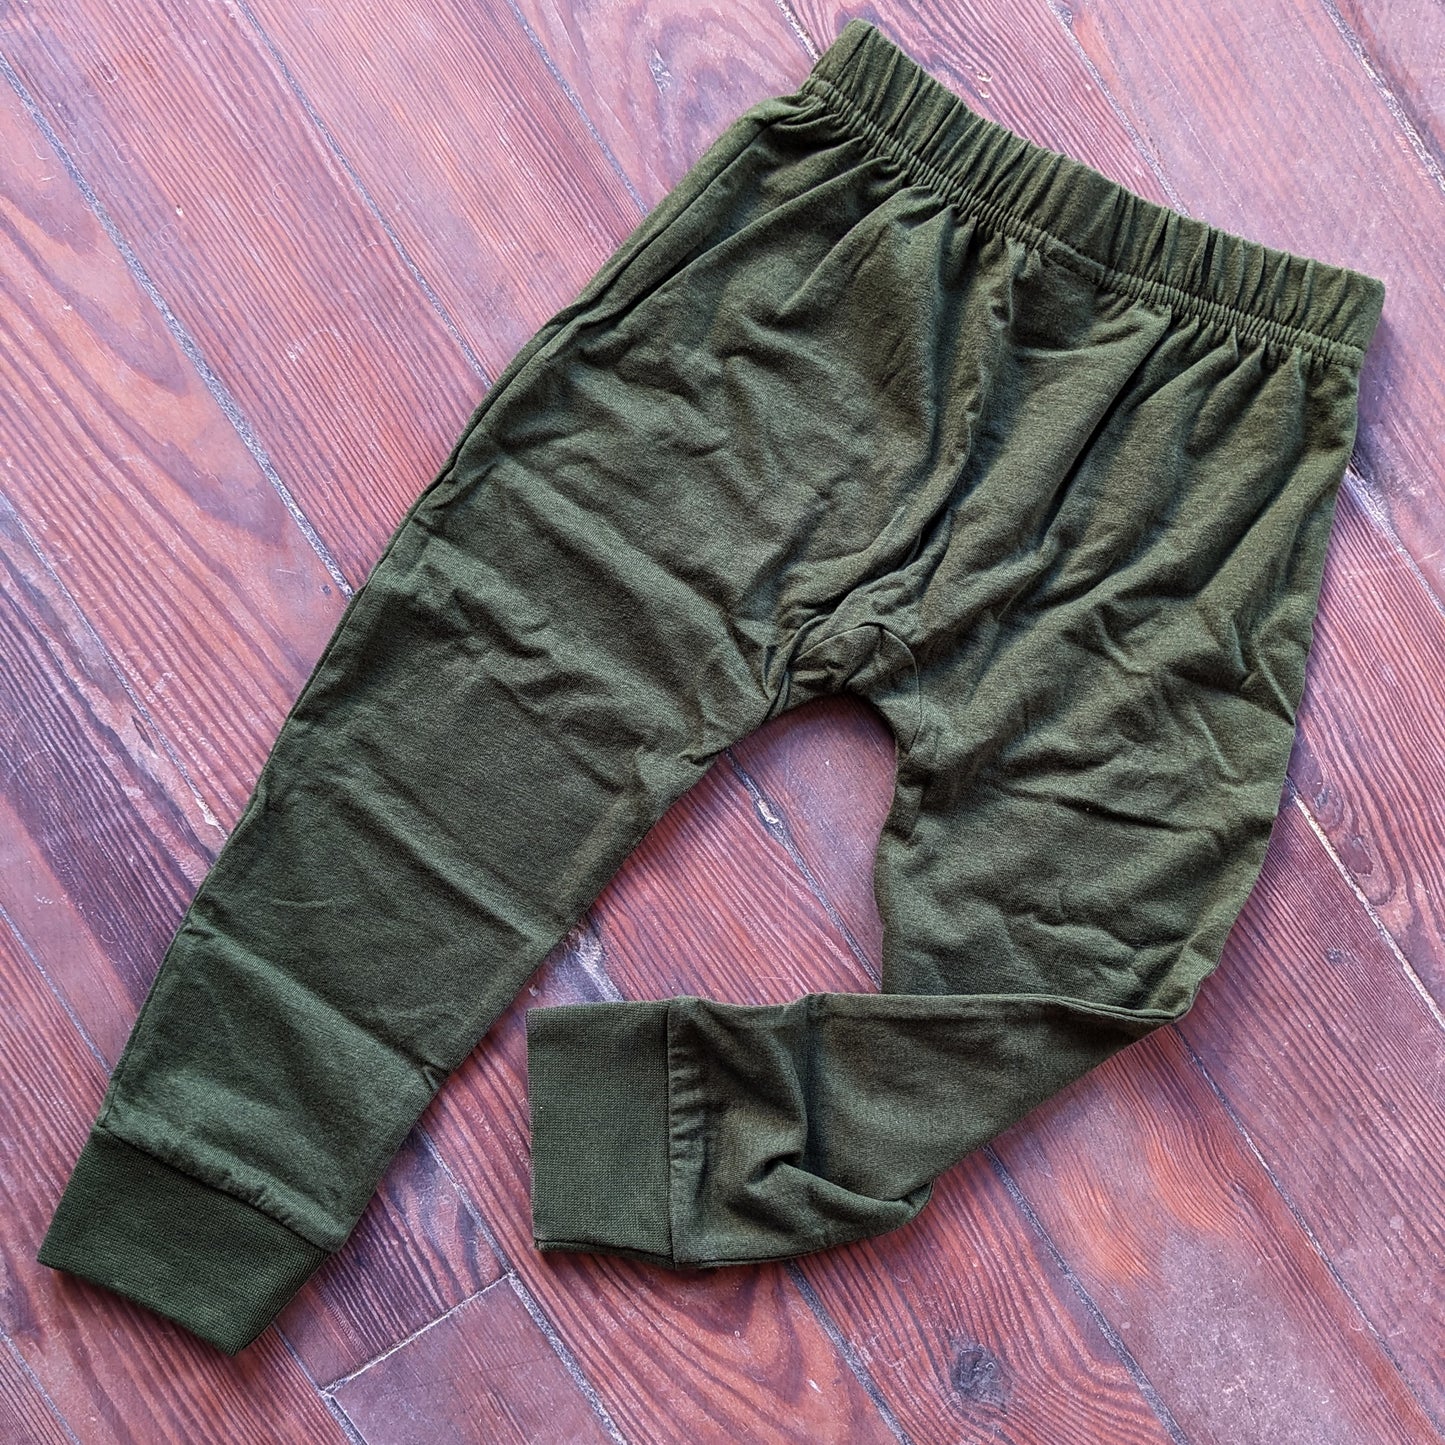 "Forager" Grey & Green Sleep 'n Play Set | Size 2T through 5T | Includes Shirt & Joggers